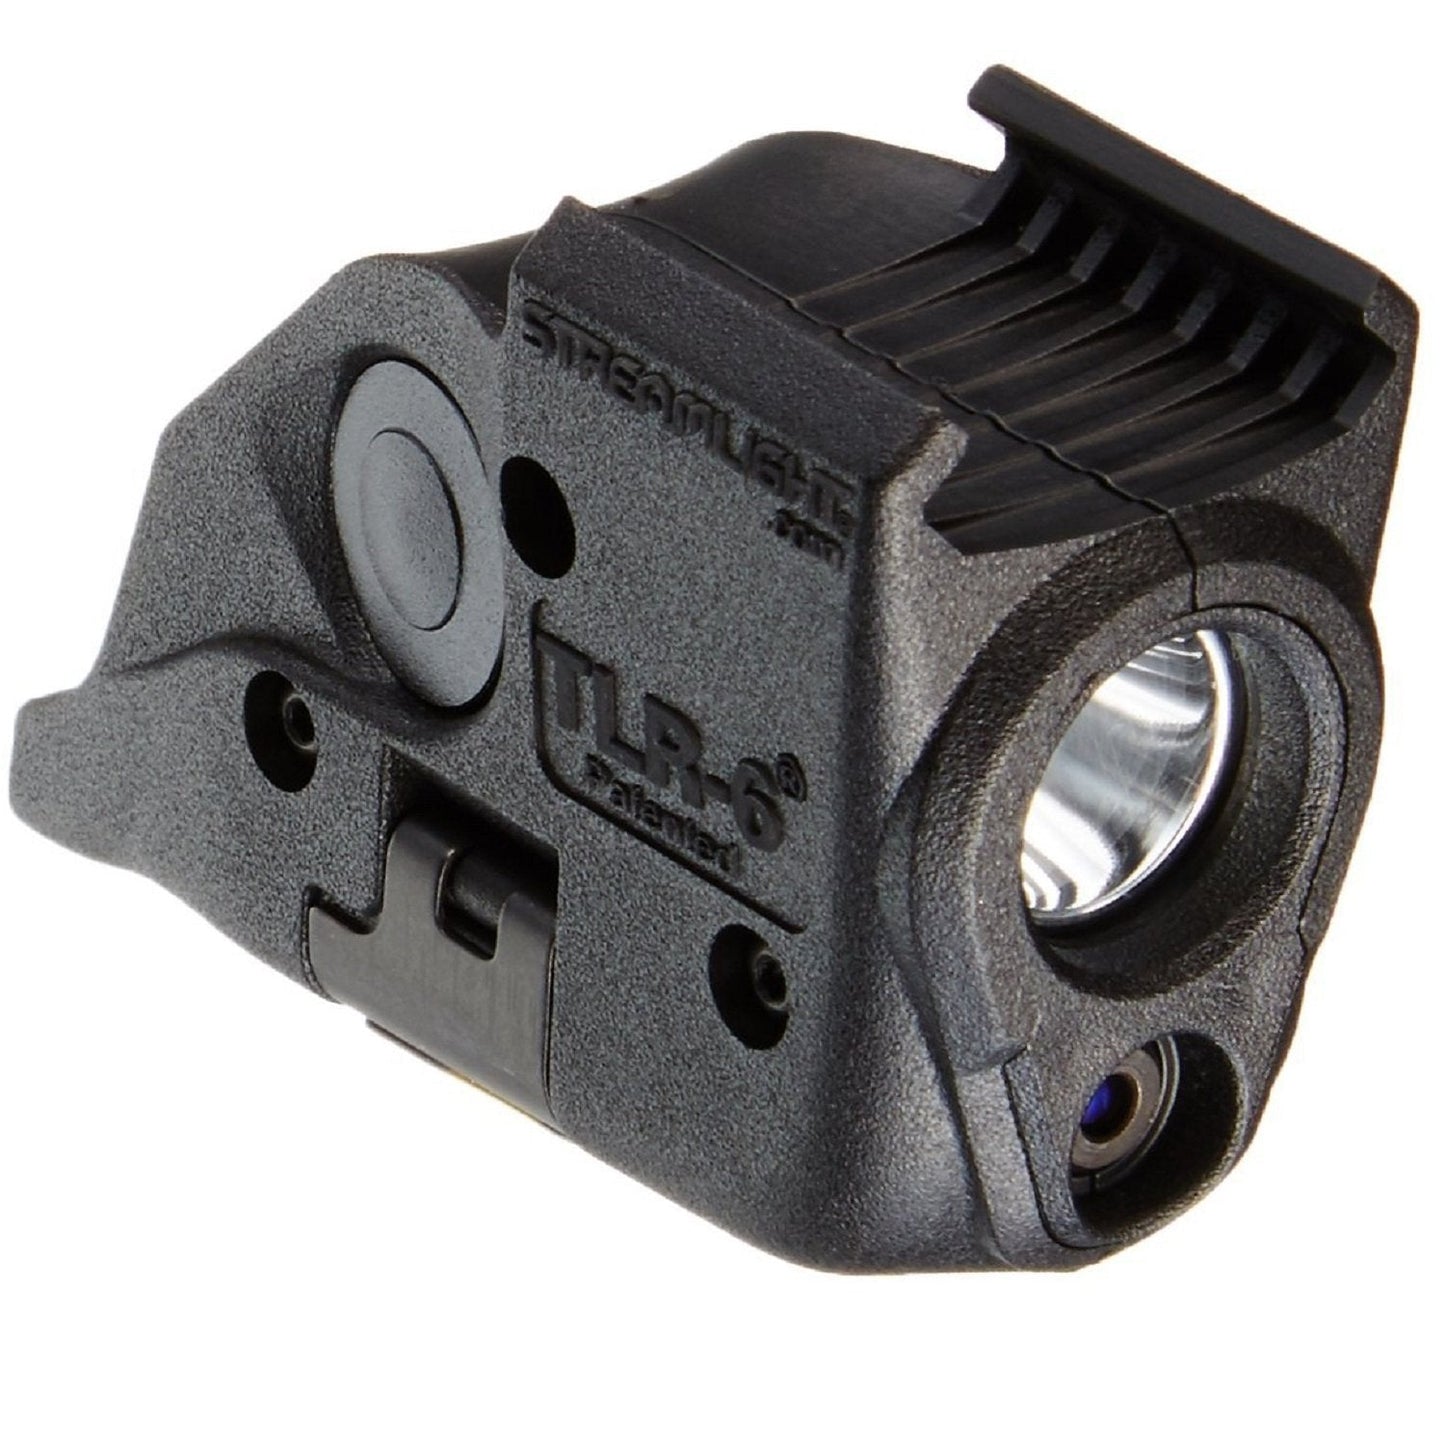 Streamlight TLR-6 for S&W M&P 100-Lumens with Red Laser Tactical Weapon Light Tactical Distributors Ltd New Zealand